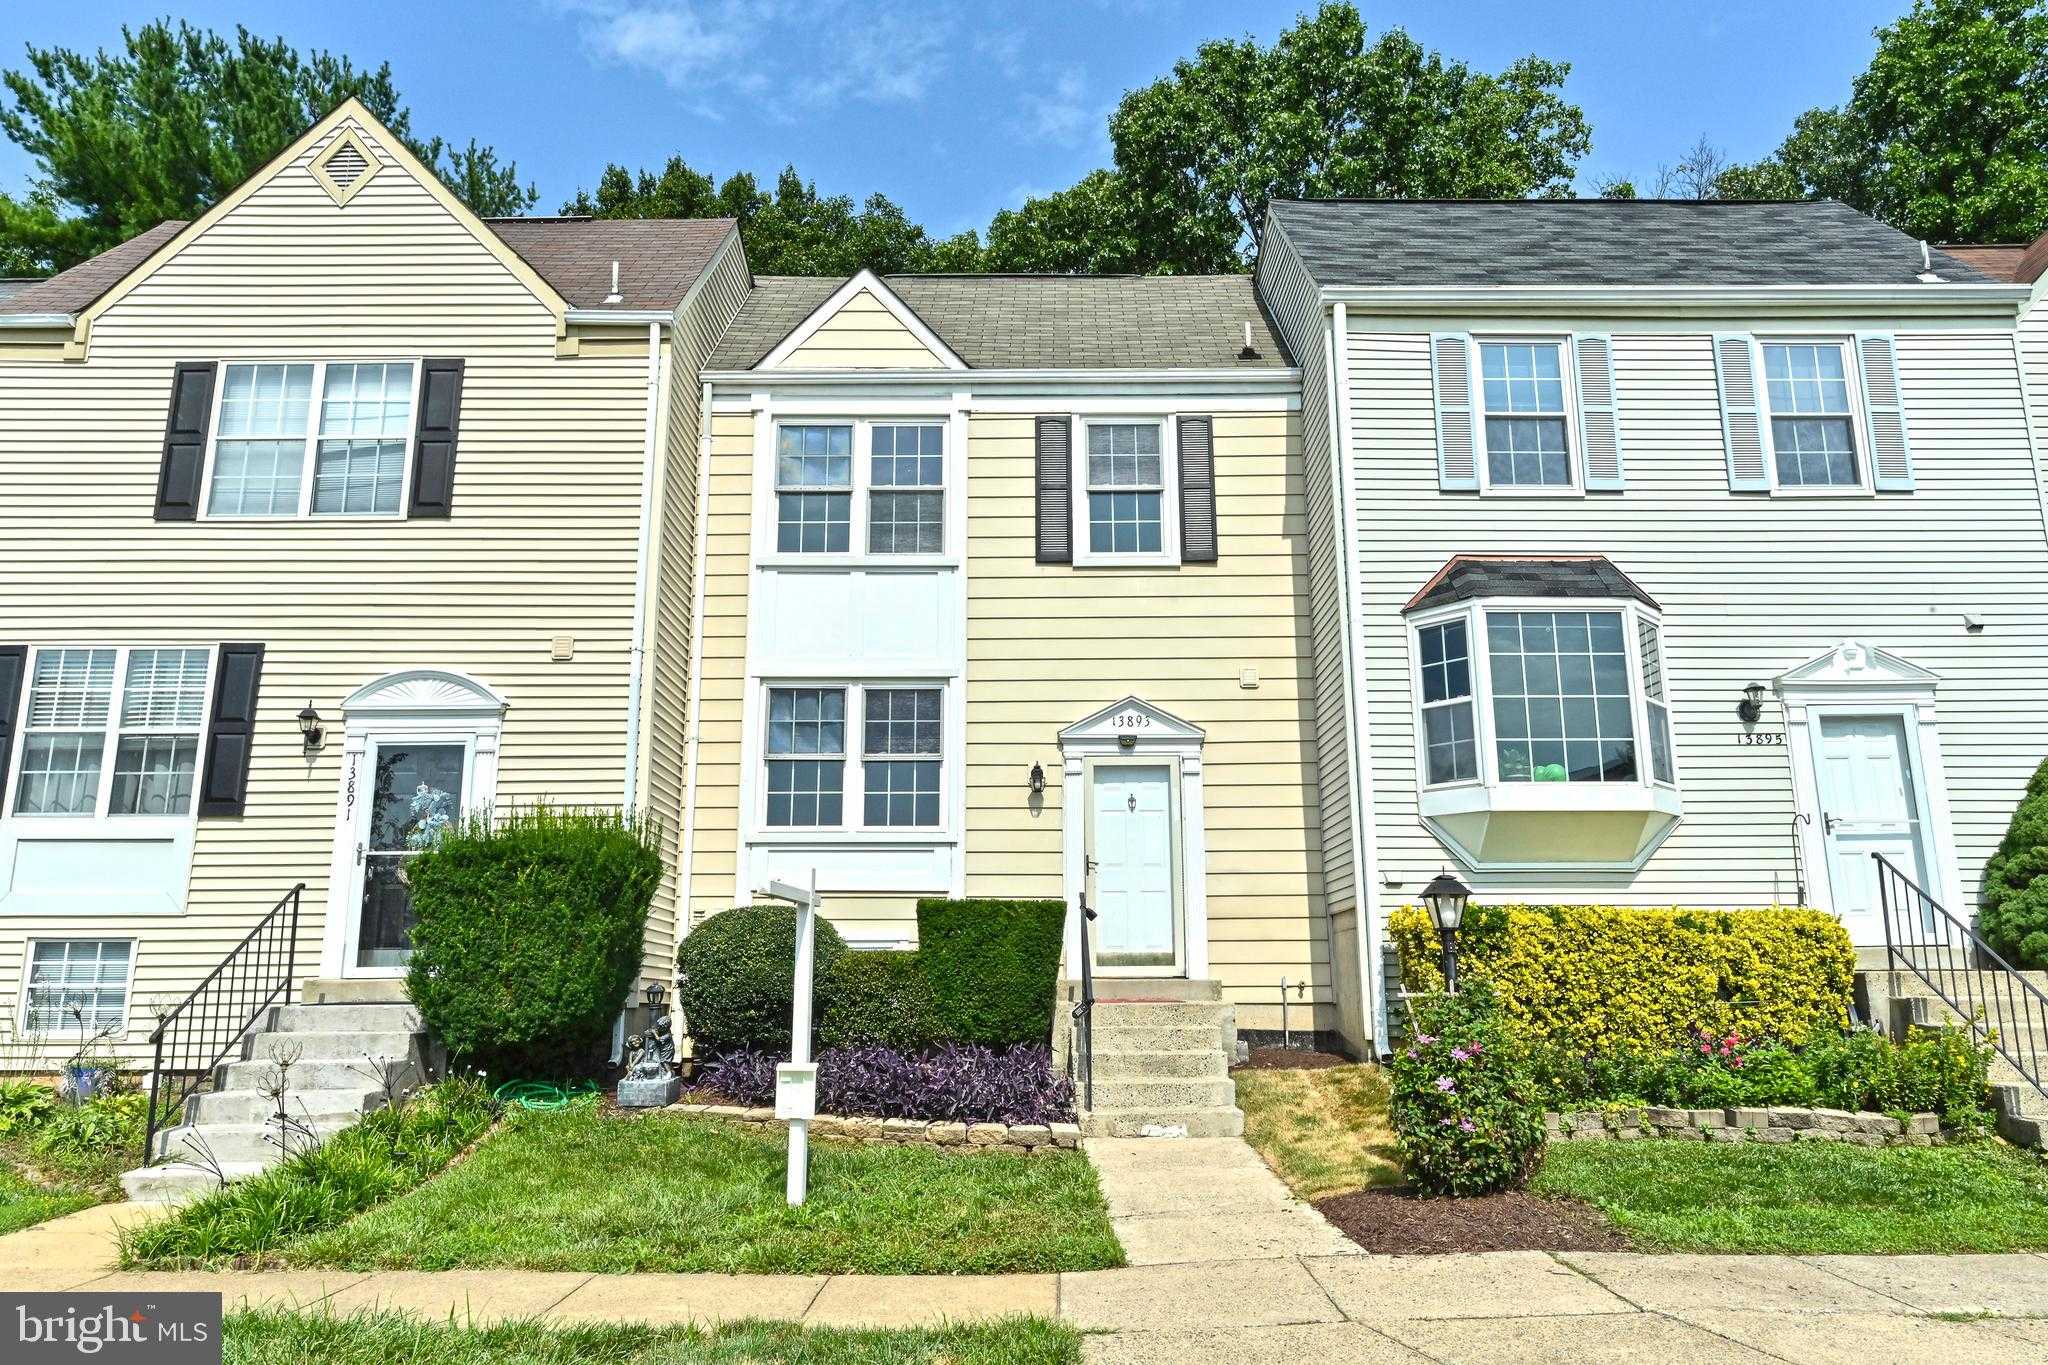 View CENTREVILLE, VA 20121 townhome